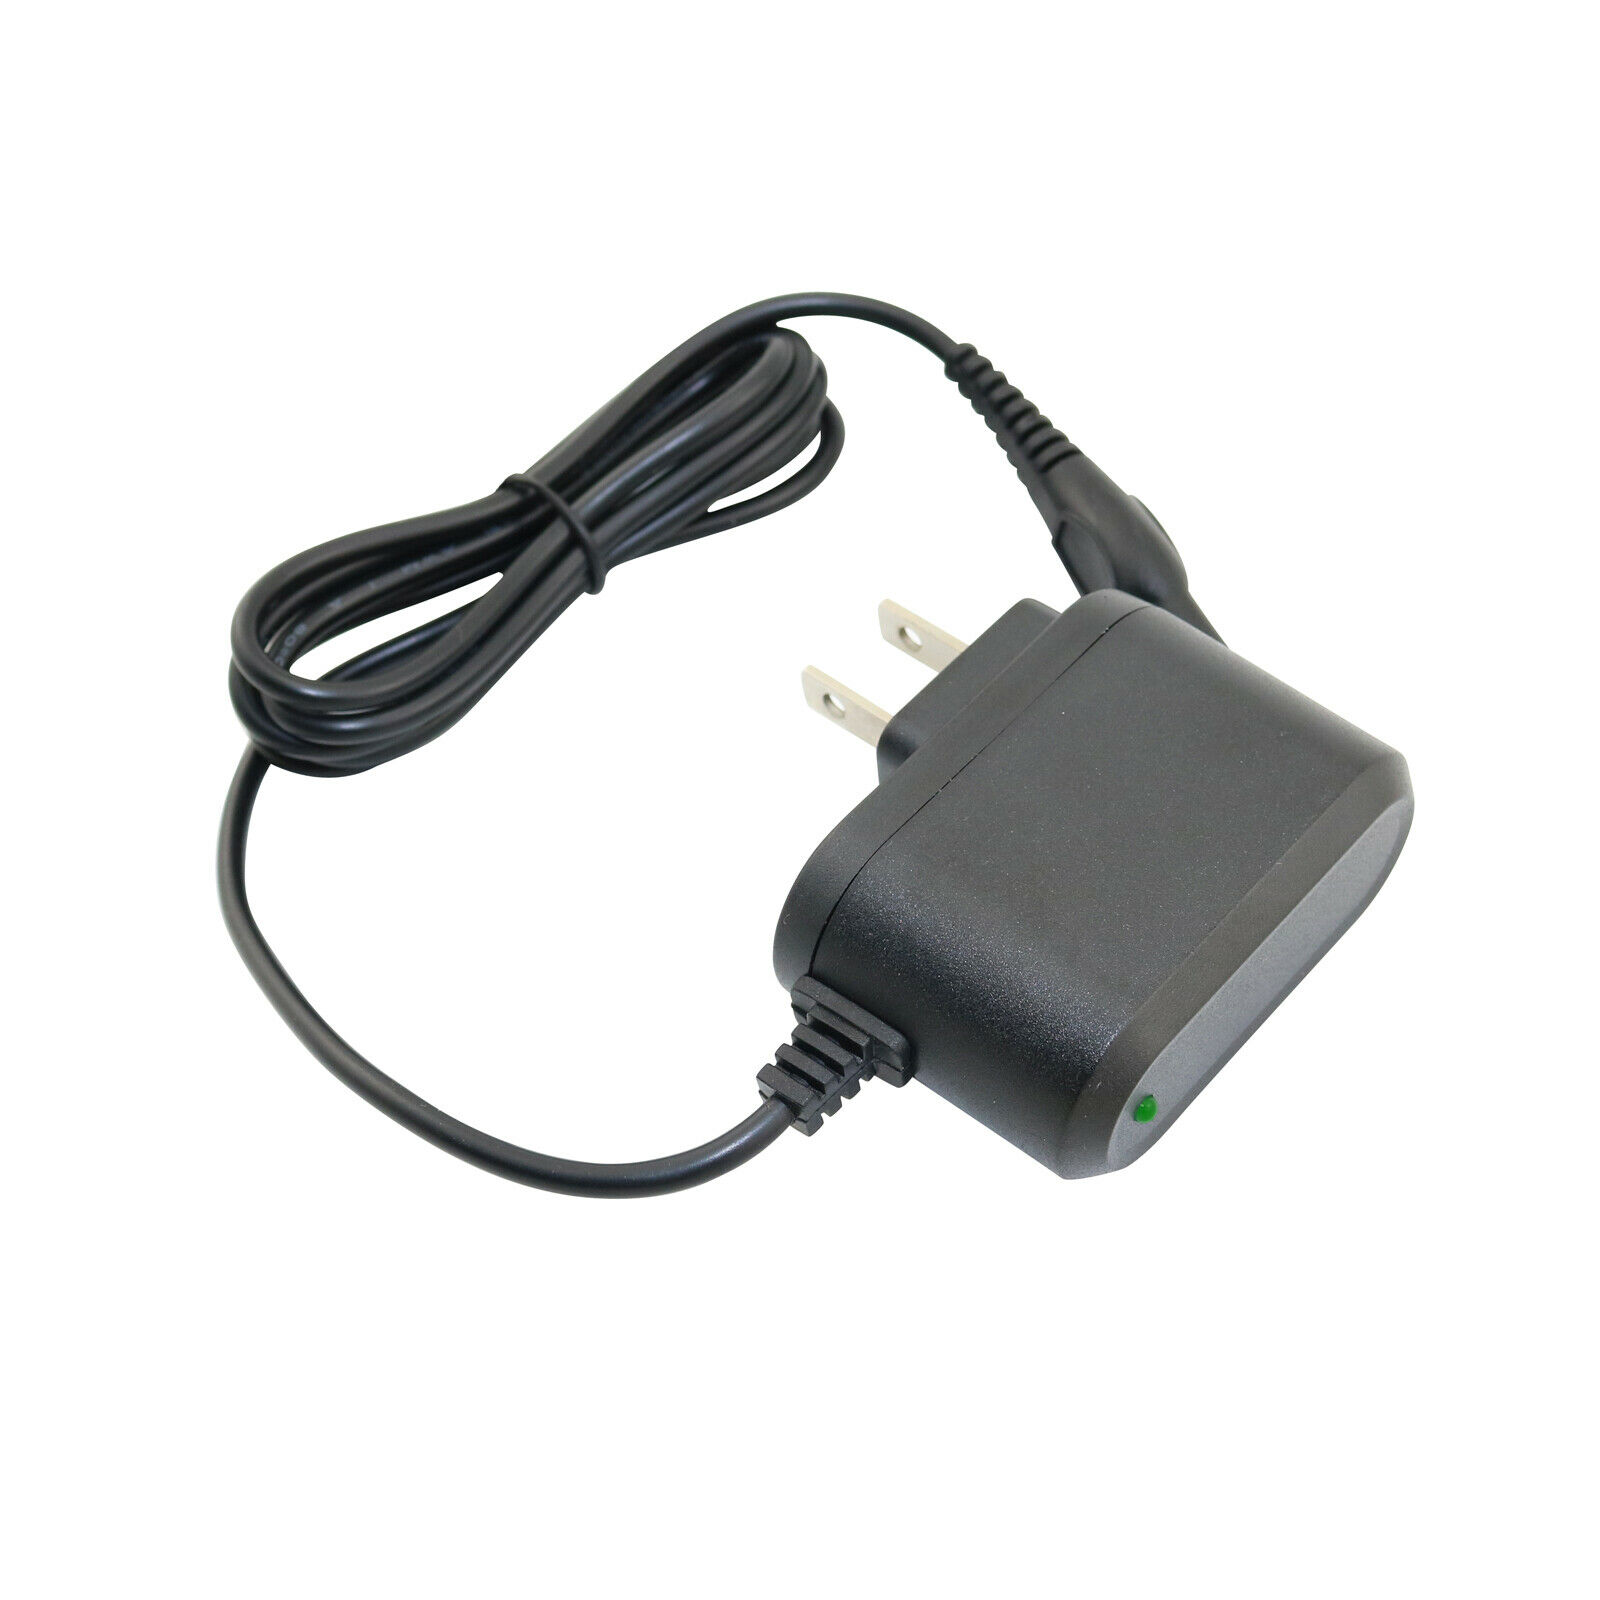 Super Power Supply® Wall Charger for Philips Norelco Electric Shaver QC5530 